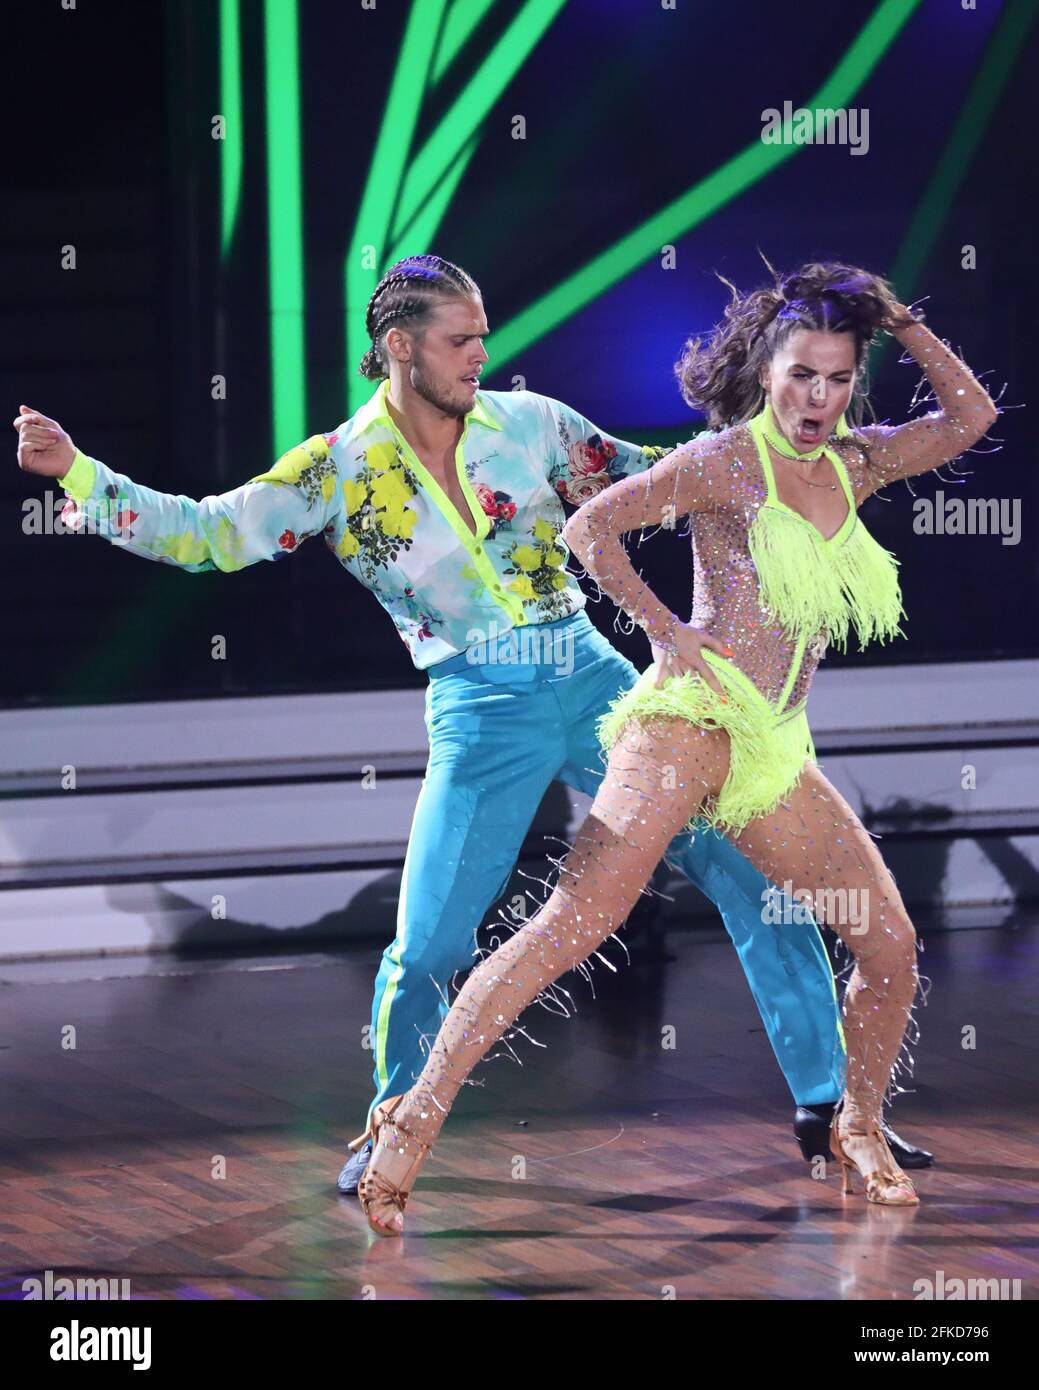 Cologne, Germany. 30th Apr, 2021. Rurik Gislason, footballer, and Renata Lusin, professional dancer, dance during the 8th show of the 14th season of the RTL dance show 'Let's Dance'. Credit: Joshua Sammer/Getty/POOL/dpa/Alamy Live News Stock Photo